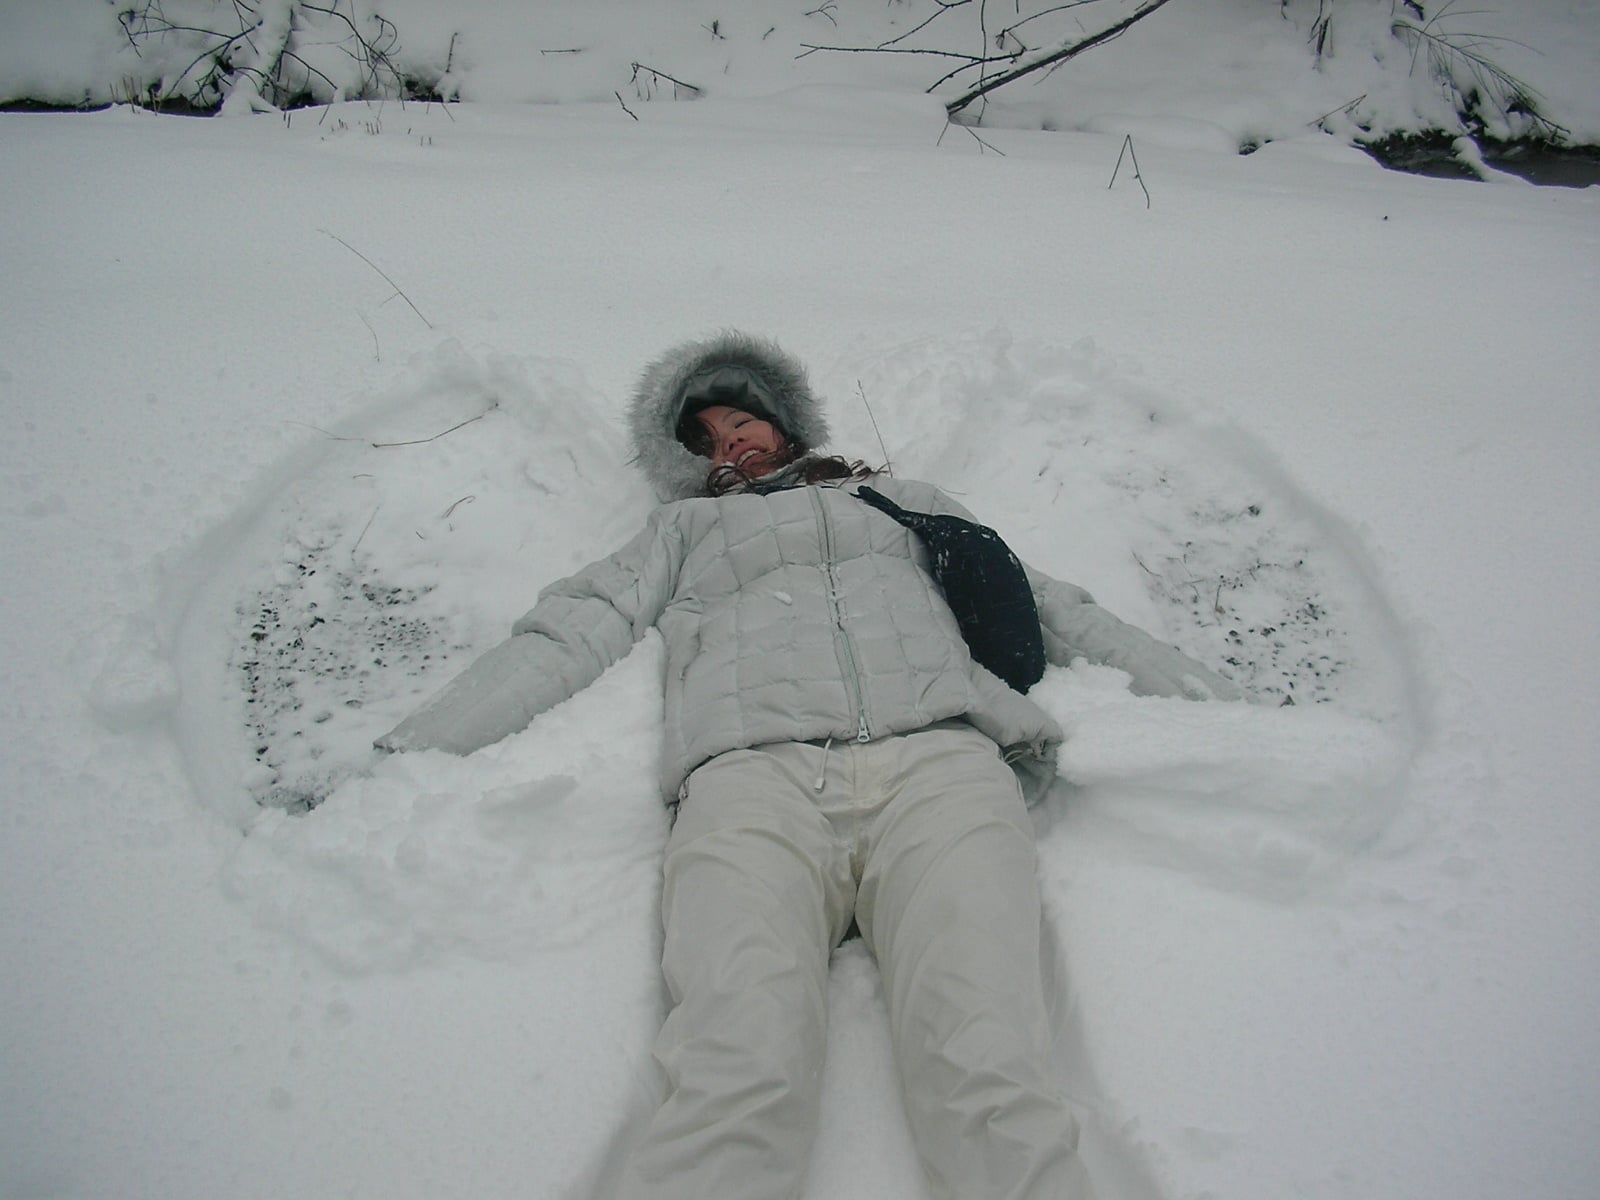 An Angel Making Snow Angels